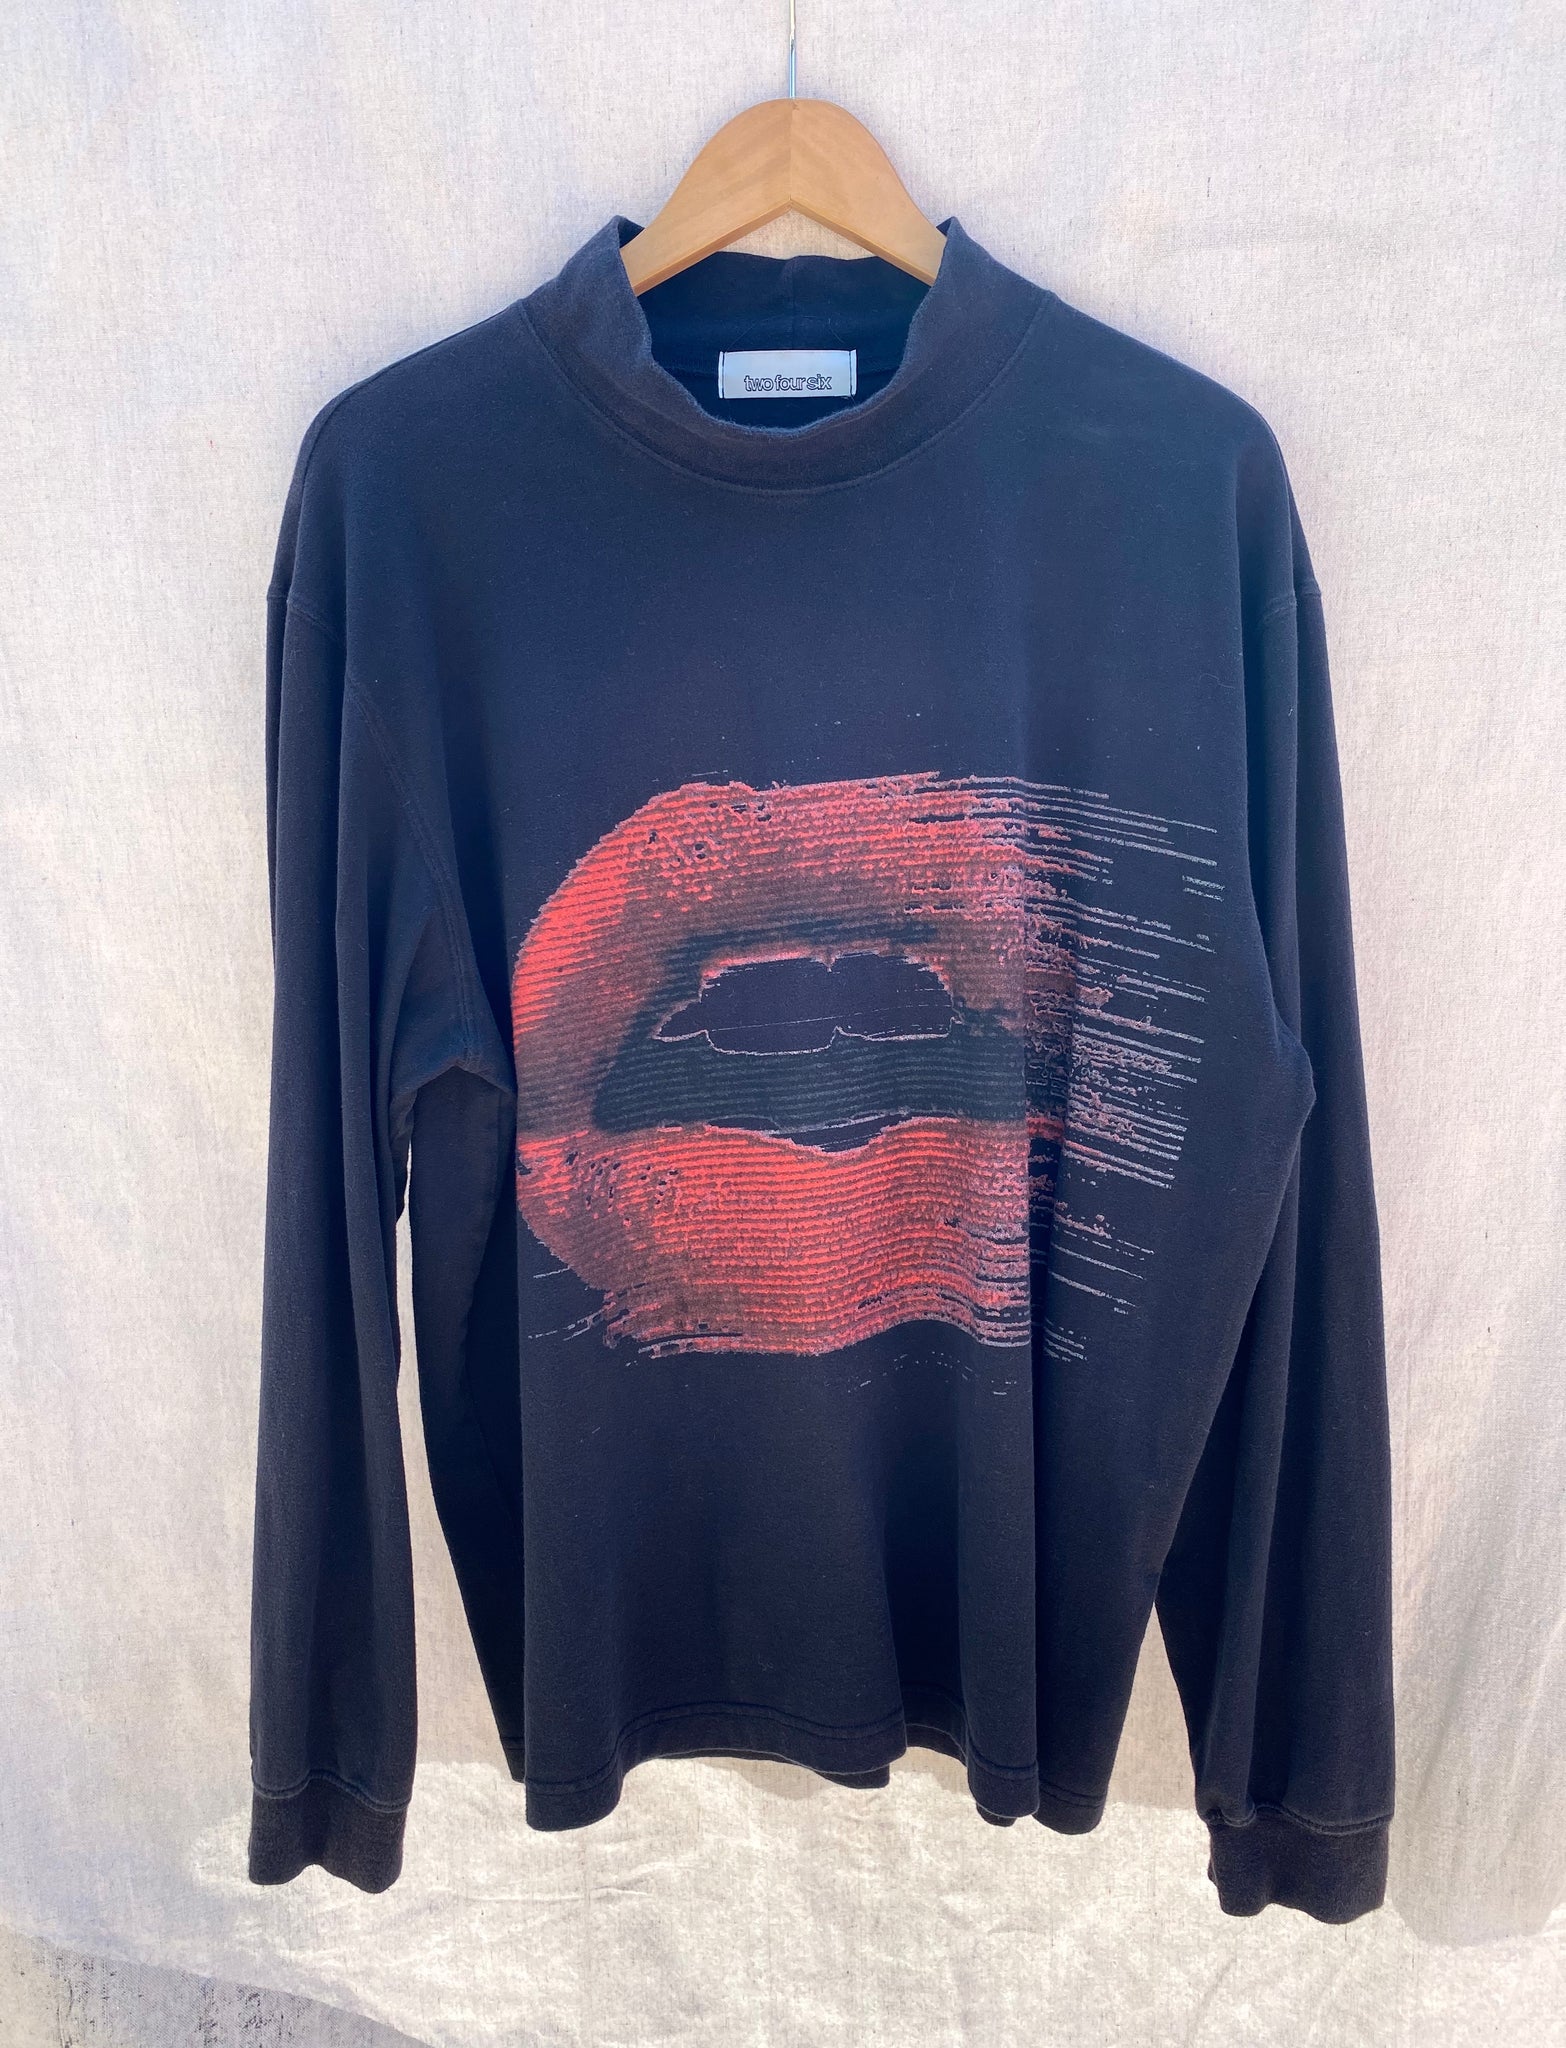 FRONT VIEW BLACK LONG SLEEVE MOCK NECK WITH RED LIPS PRINTED ON IT.